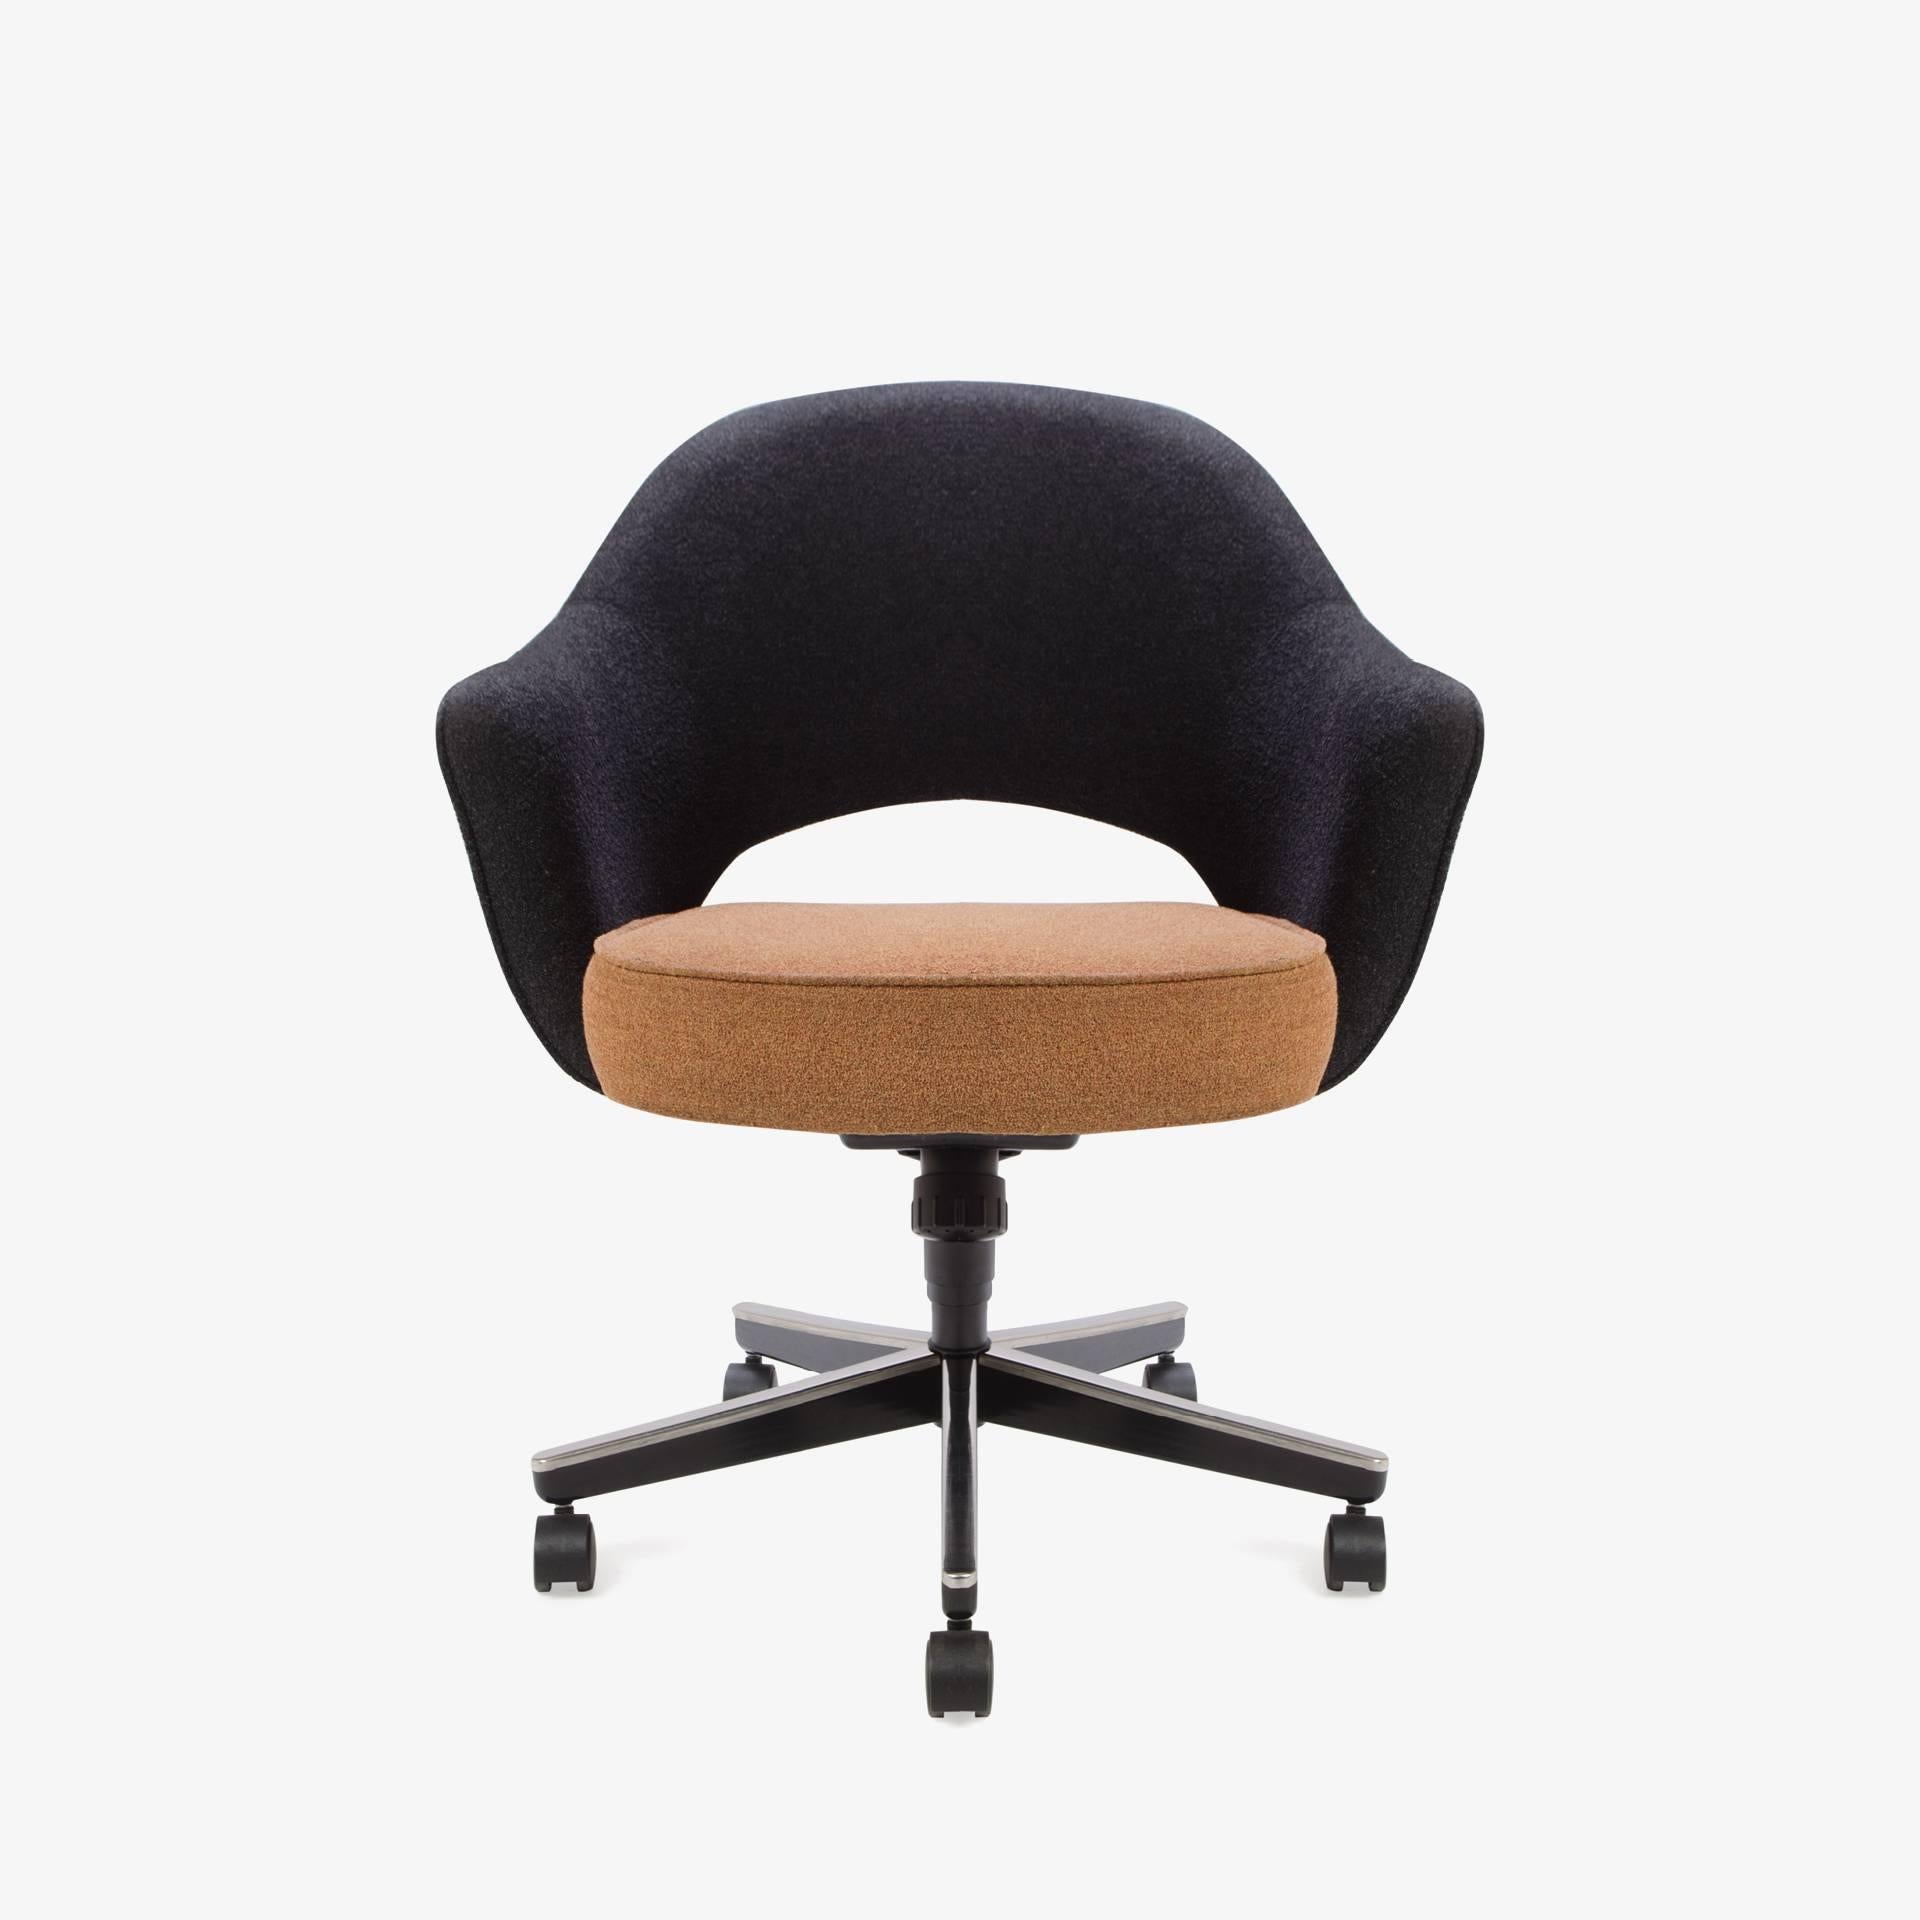 American Saarinen for Knoll Executive Armchairs in Original Two-Tone Boucle, Swivel Base